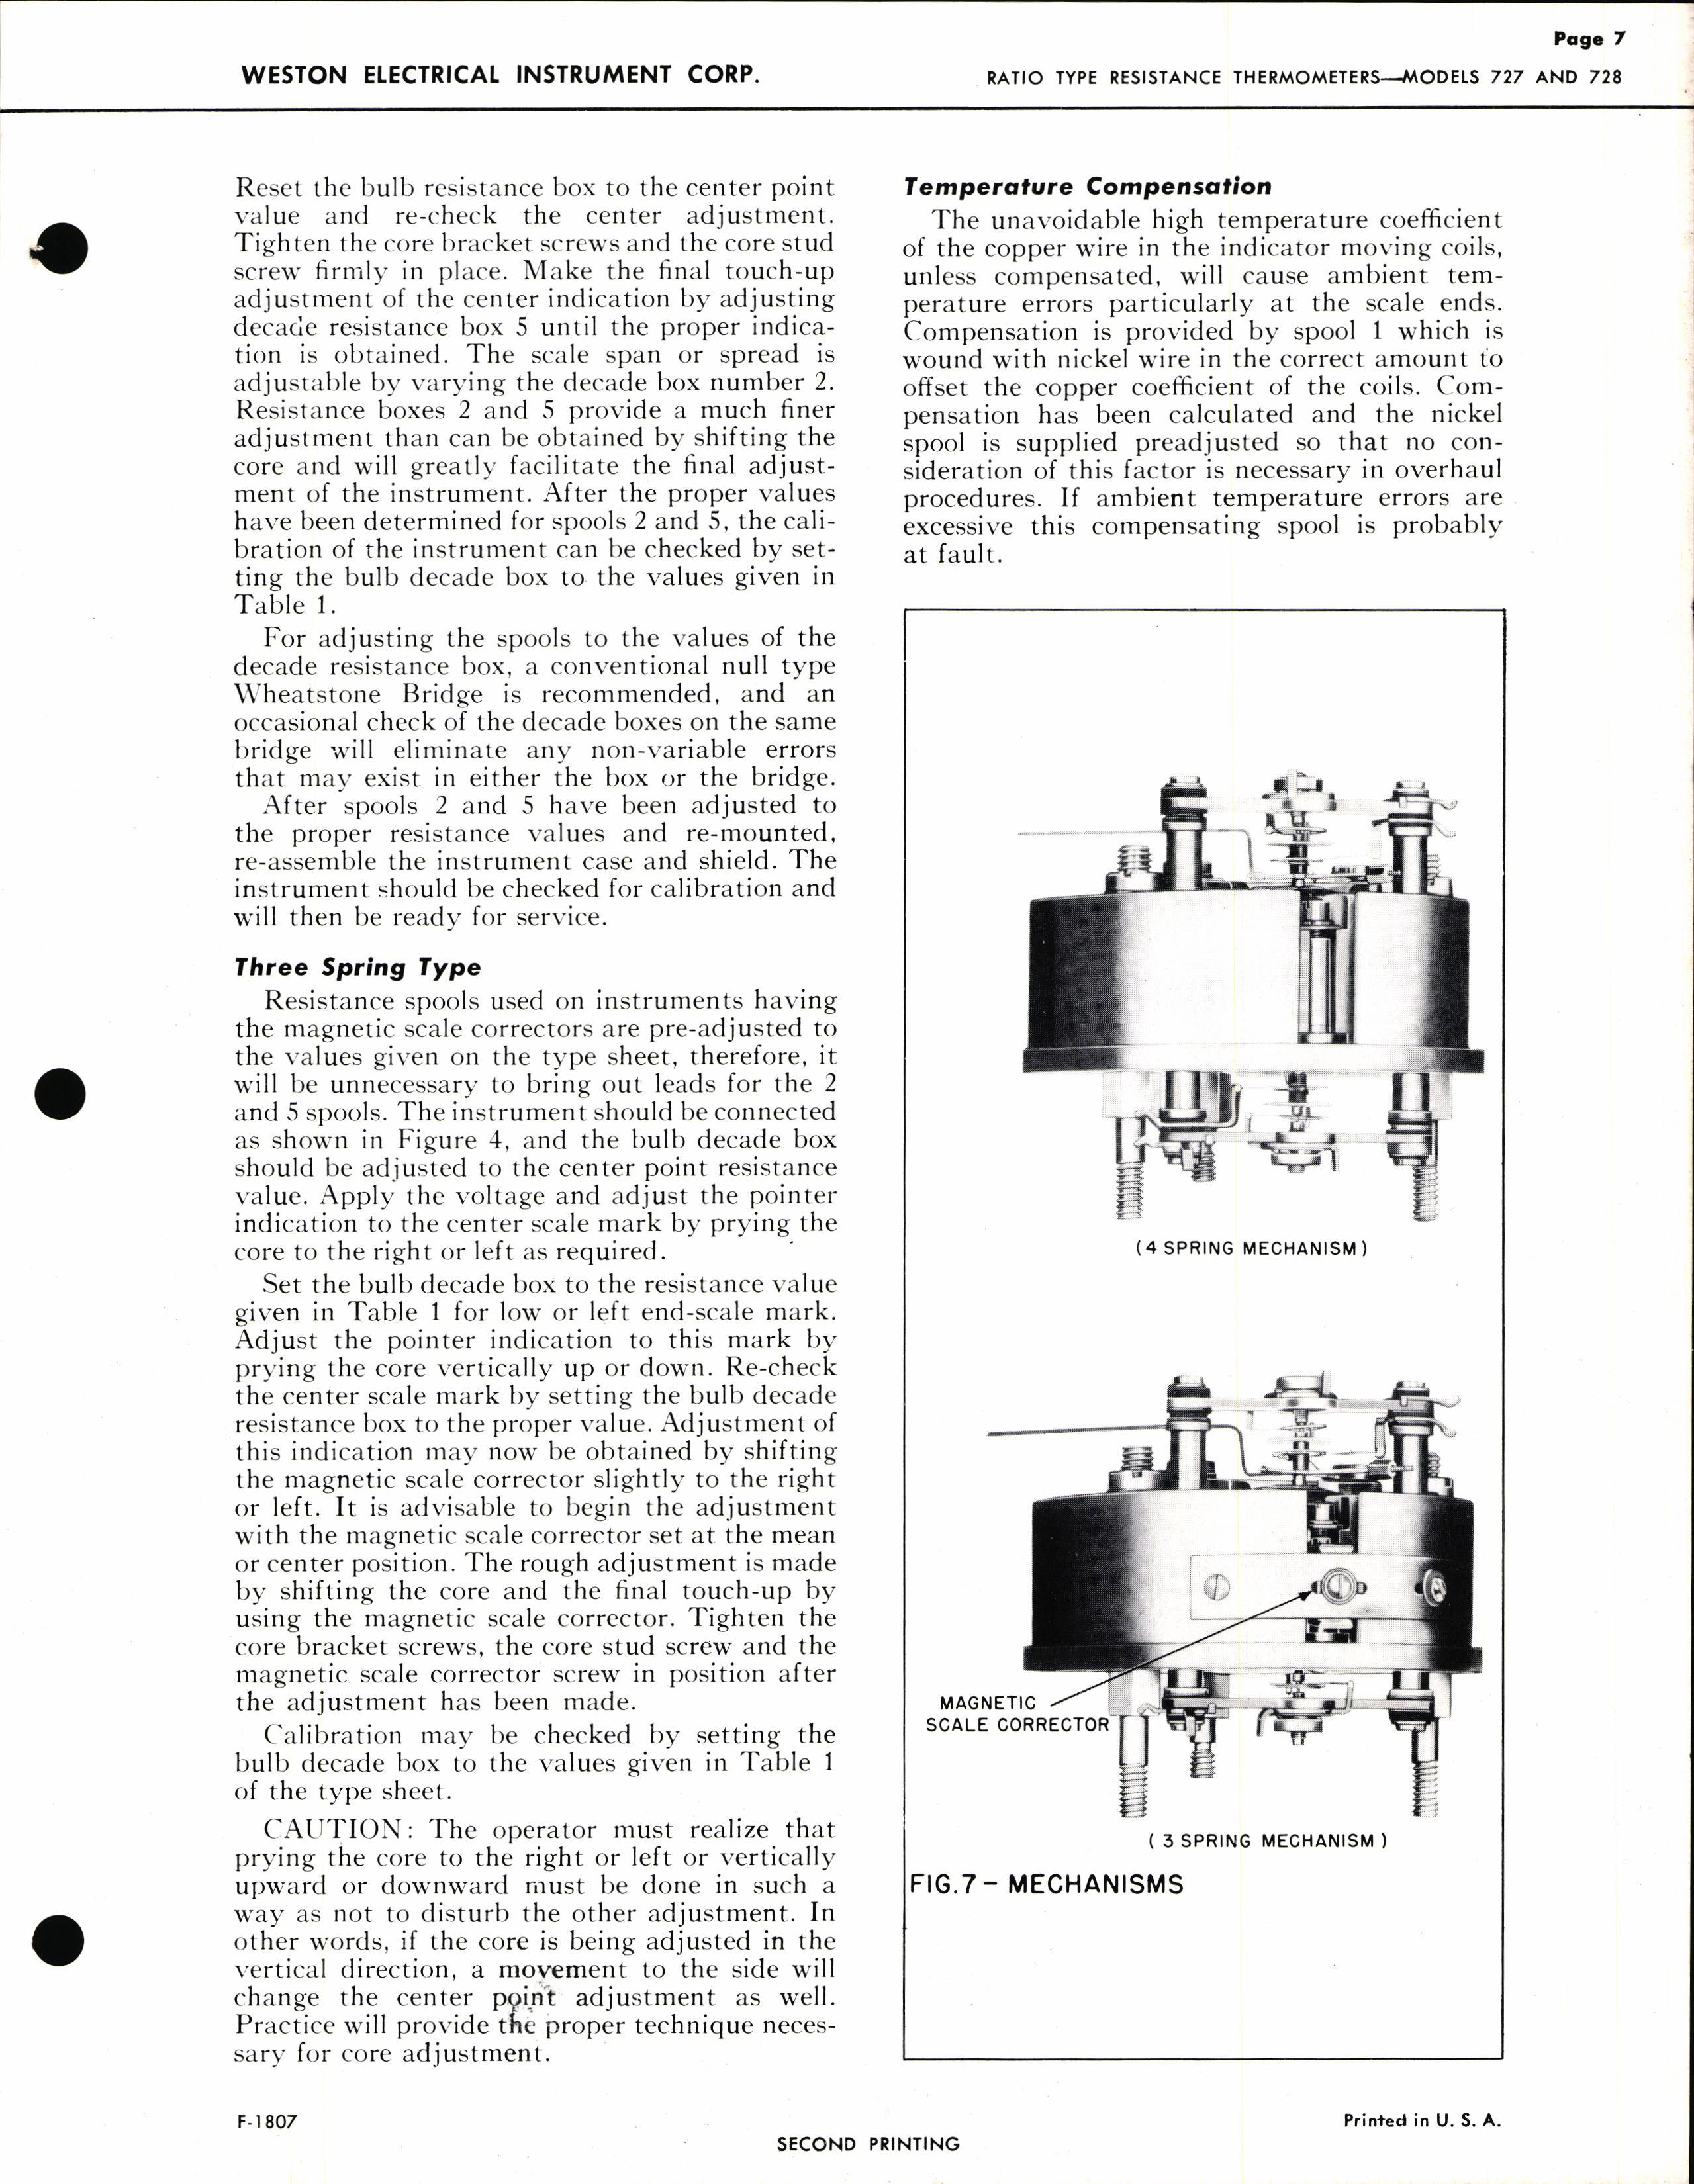 Sample page 7 from AirCorps Library document: Service Instructions for Models 727 & 728 Ratio Type Resistance Thermometers